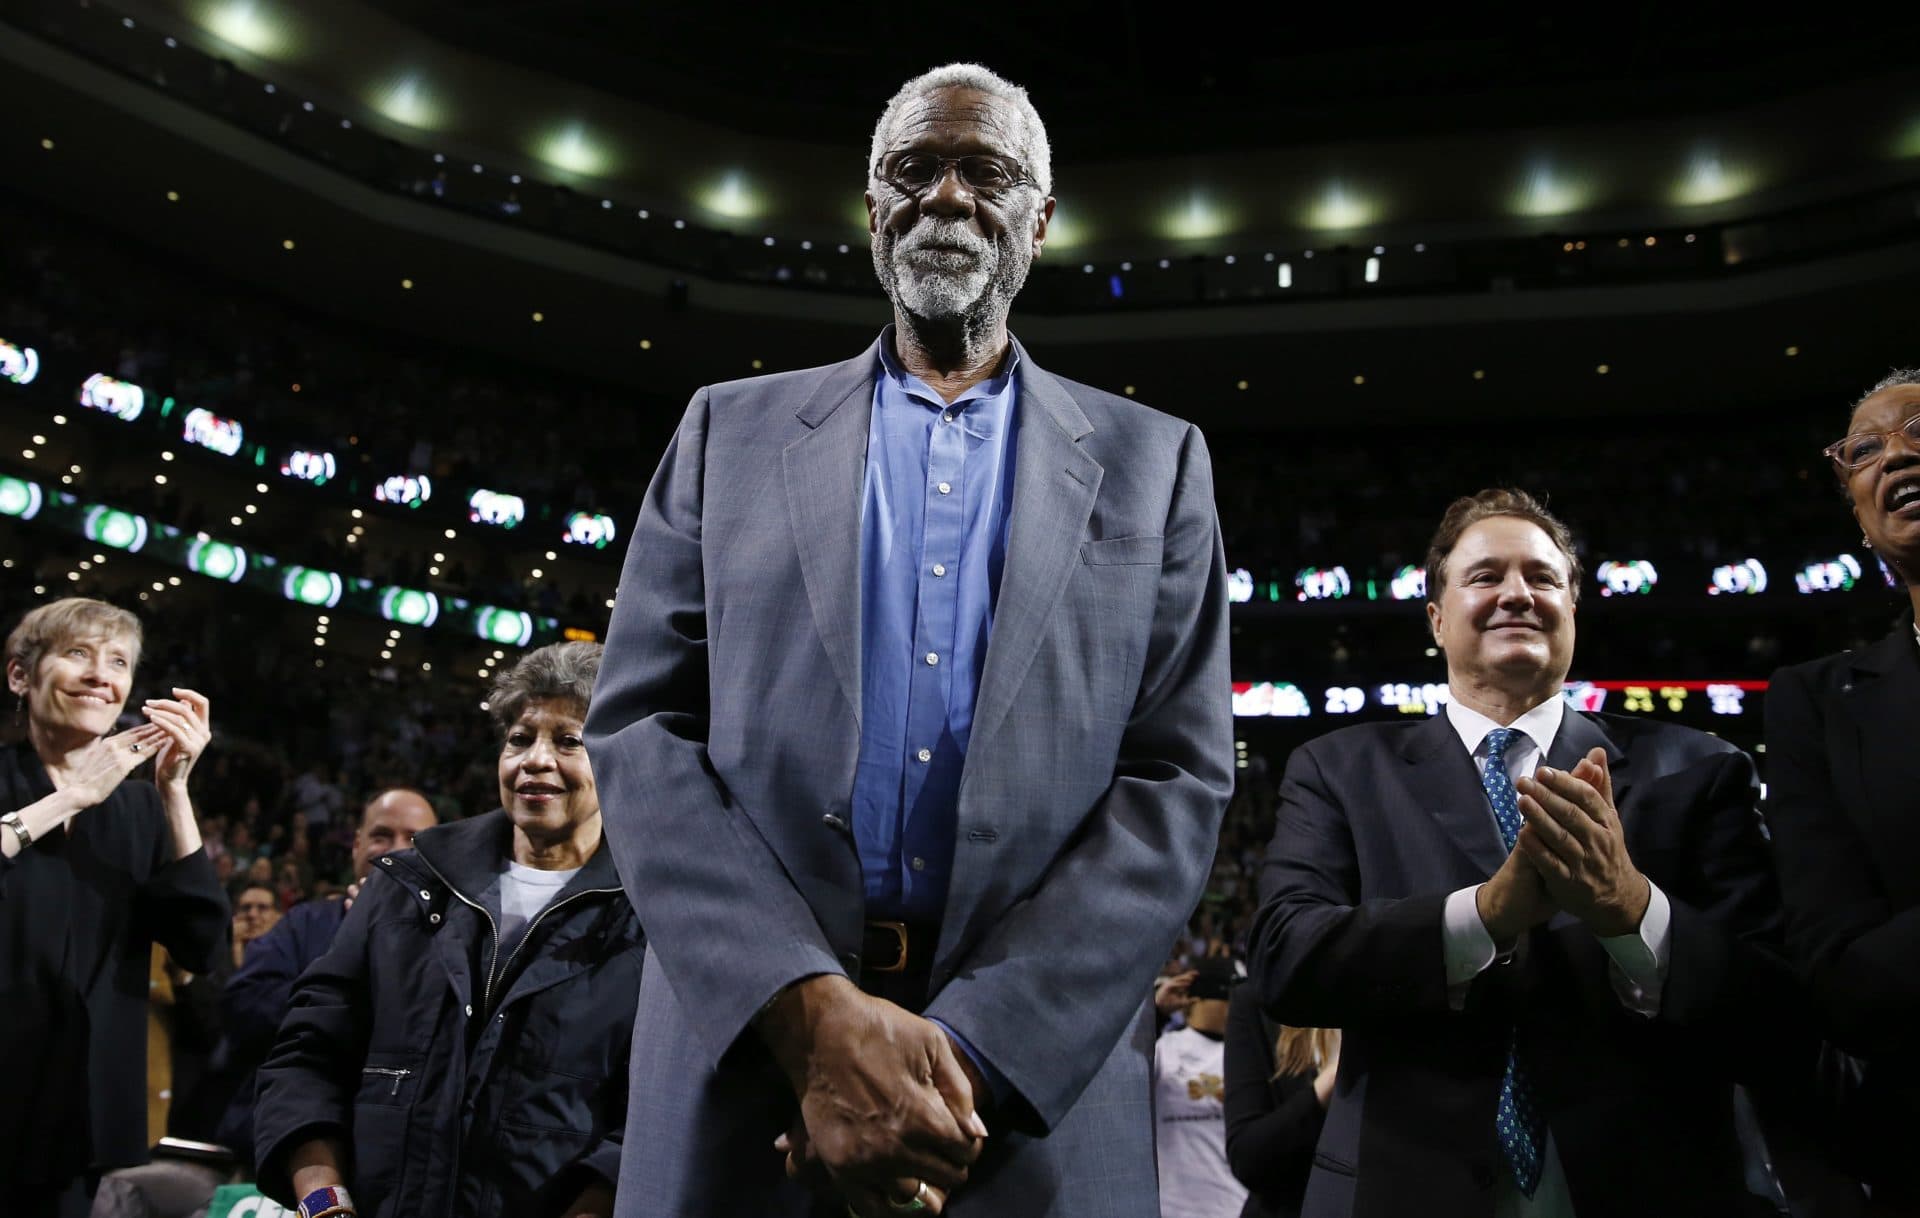 Bill Russell stands court side during a tribute in his honor in the second quarter of an NBA basketball game against the Milwaukee Bucks in Boston on Nov. 1, 2013. (Michael Dwyer/AP)